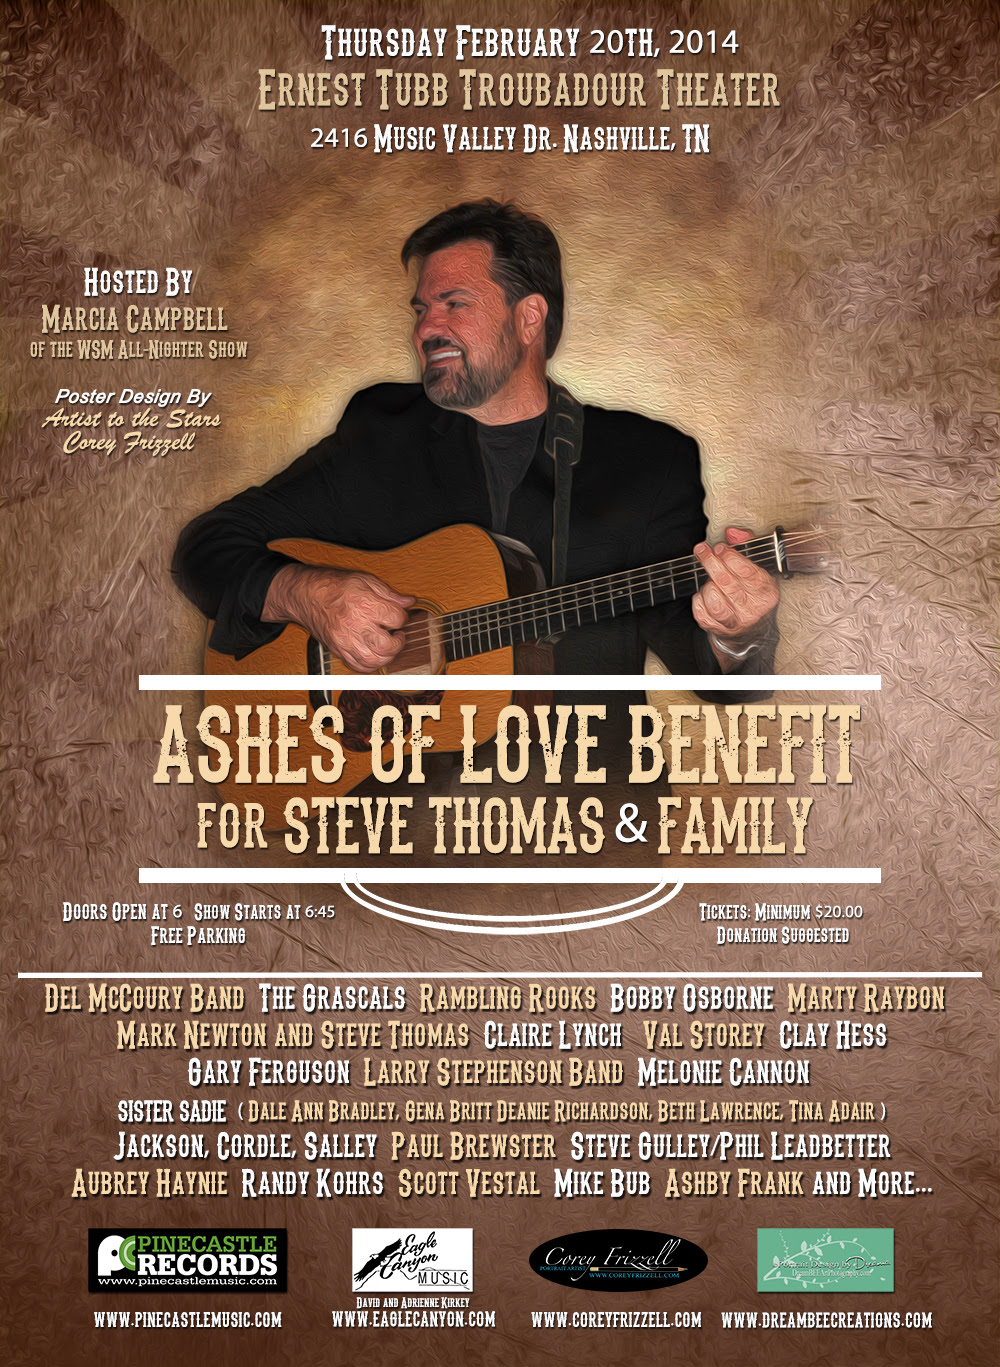 Sierra Hull Added to "Ashes of Love" Benefit Concert